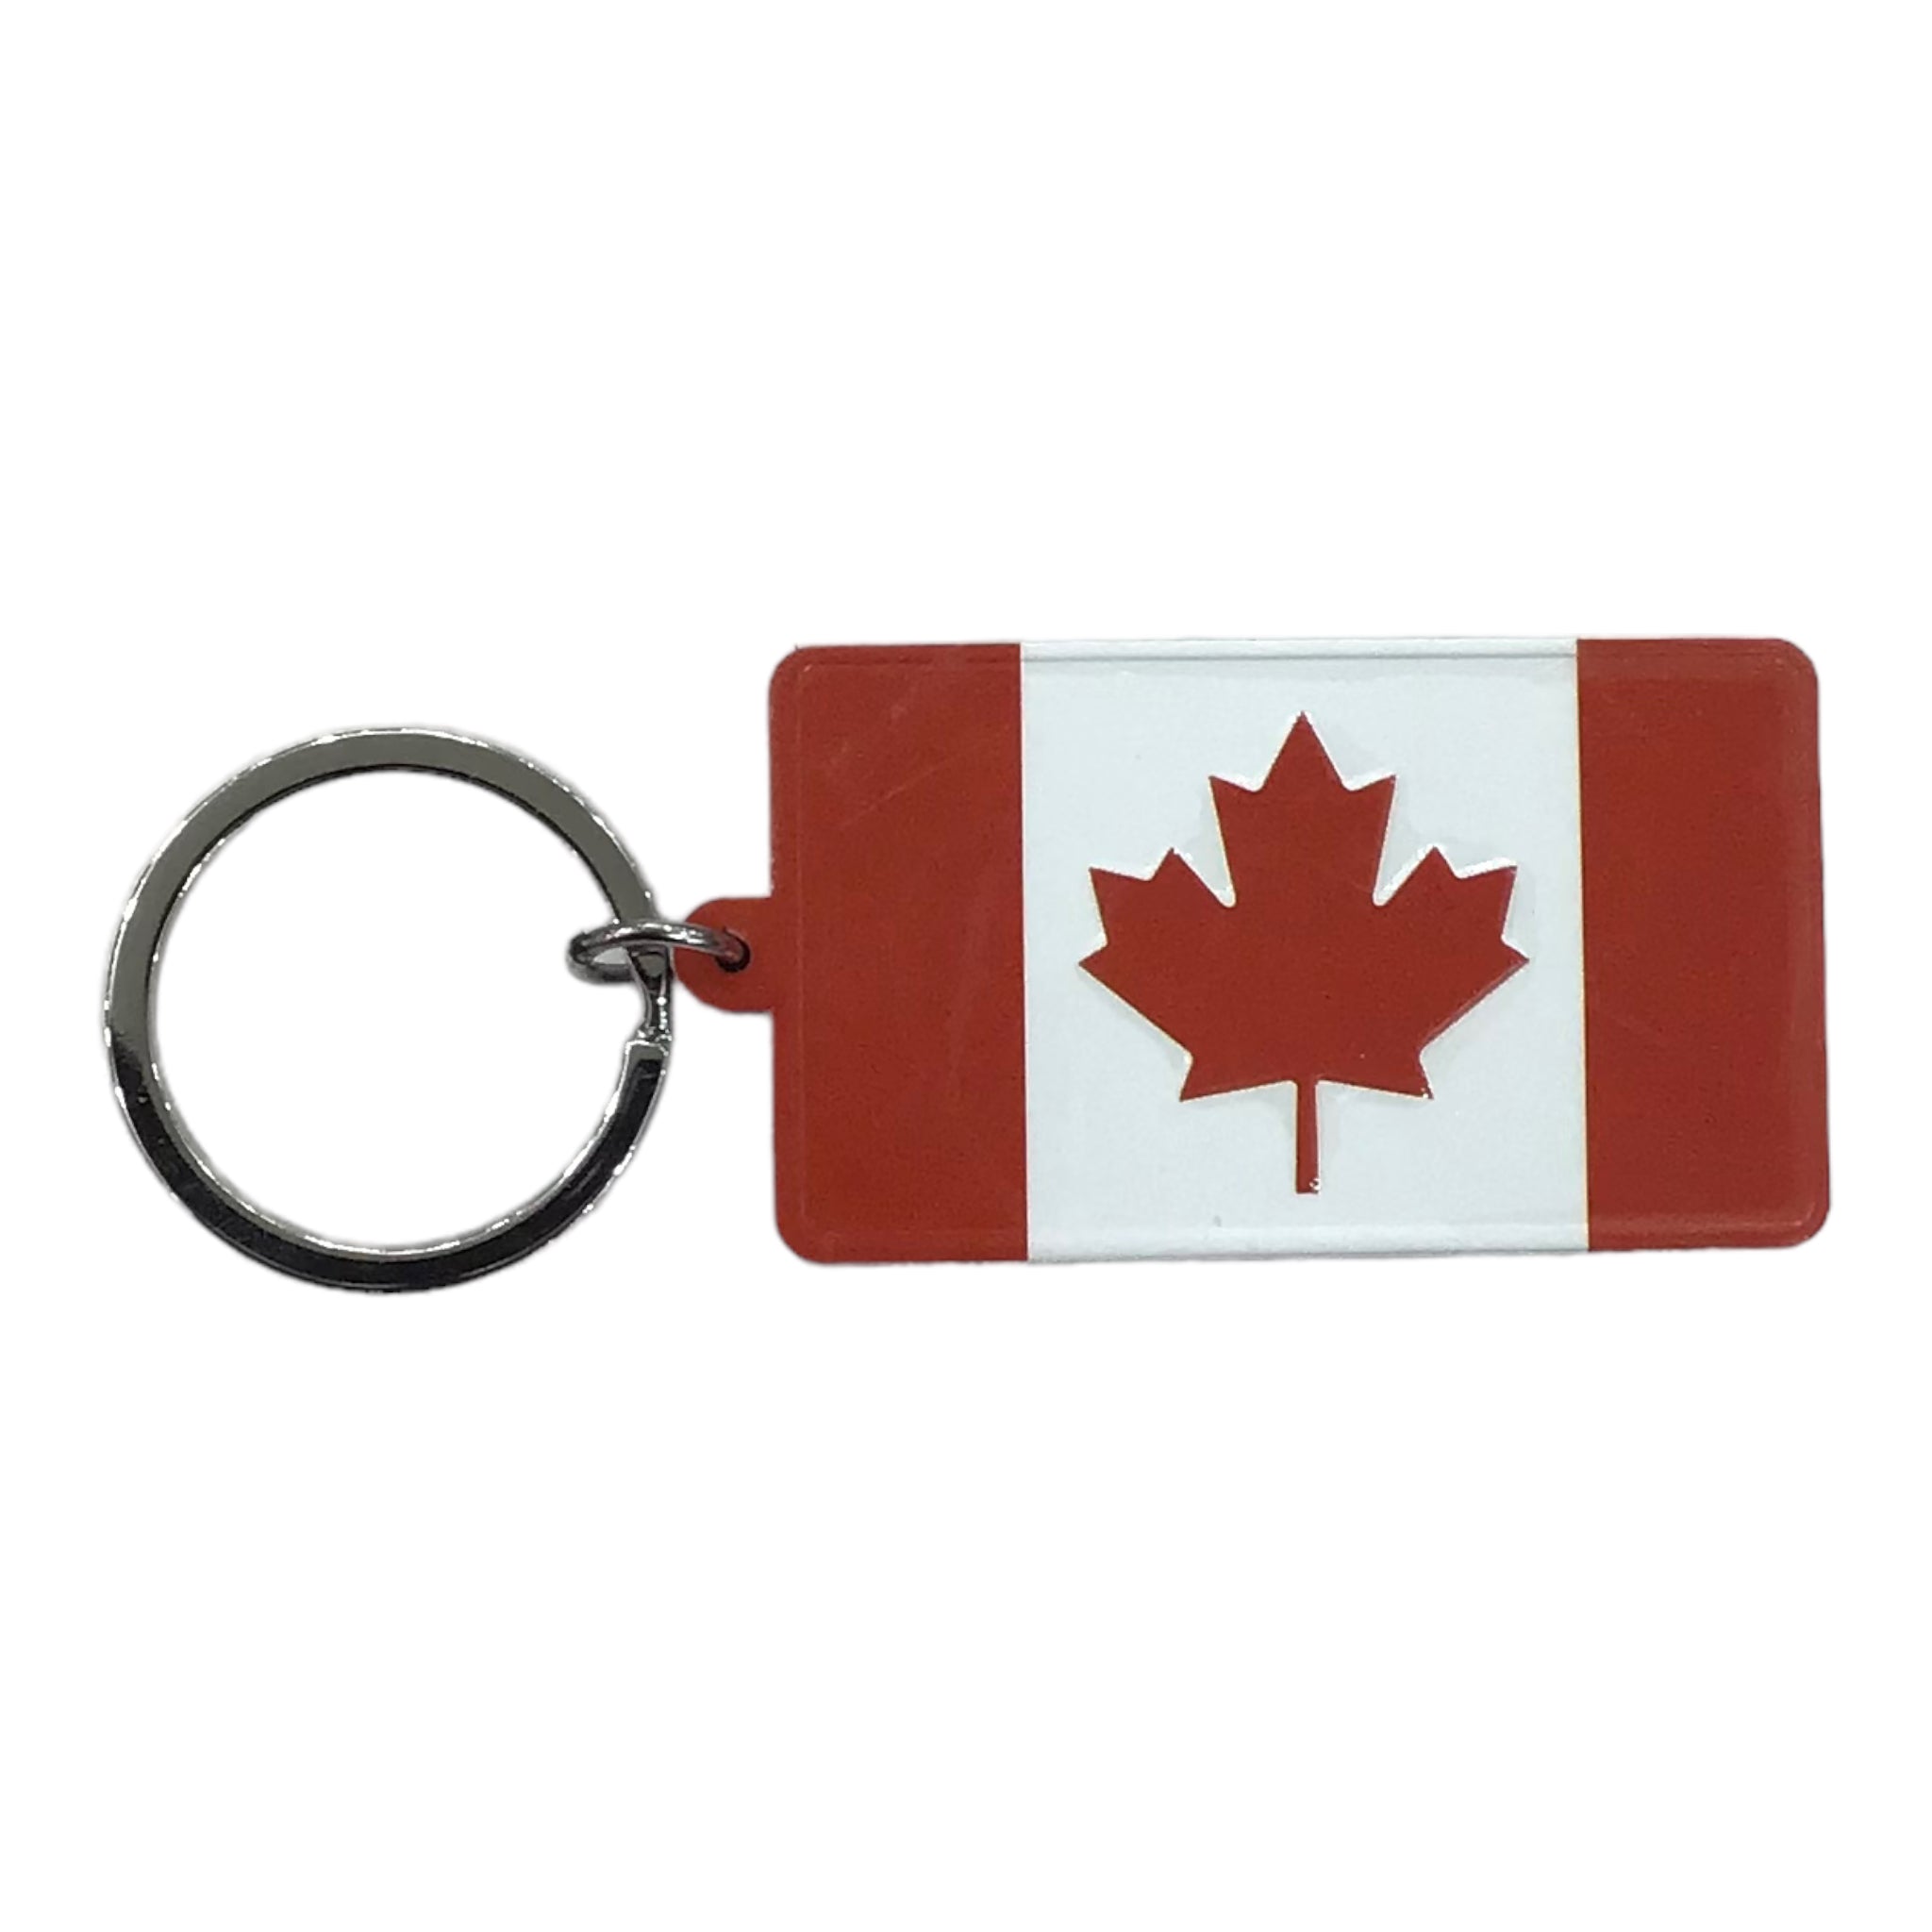 Keychain Double Sided - Montreal Car Plate Theme and Canadian Flag Key Ring